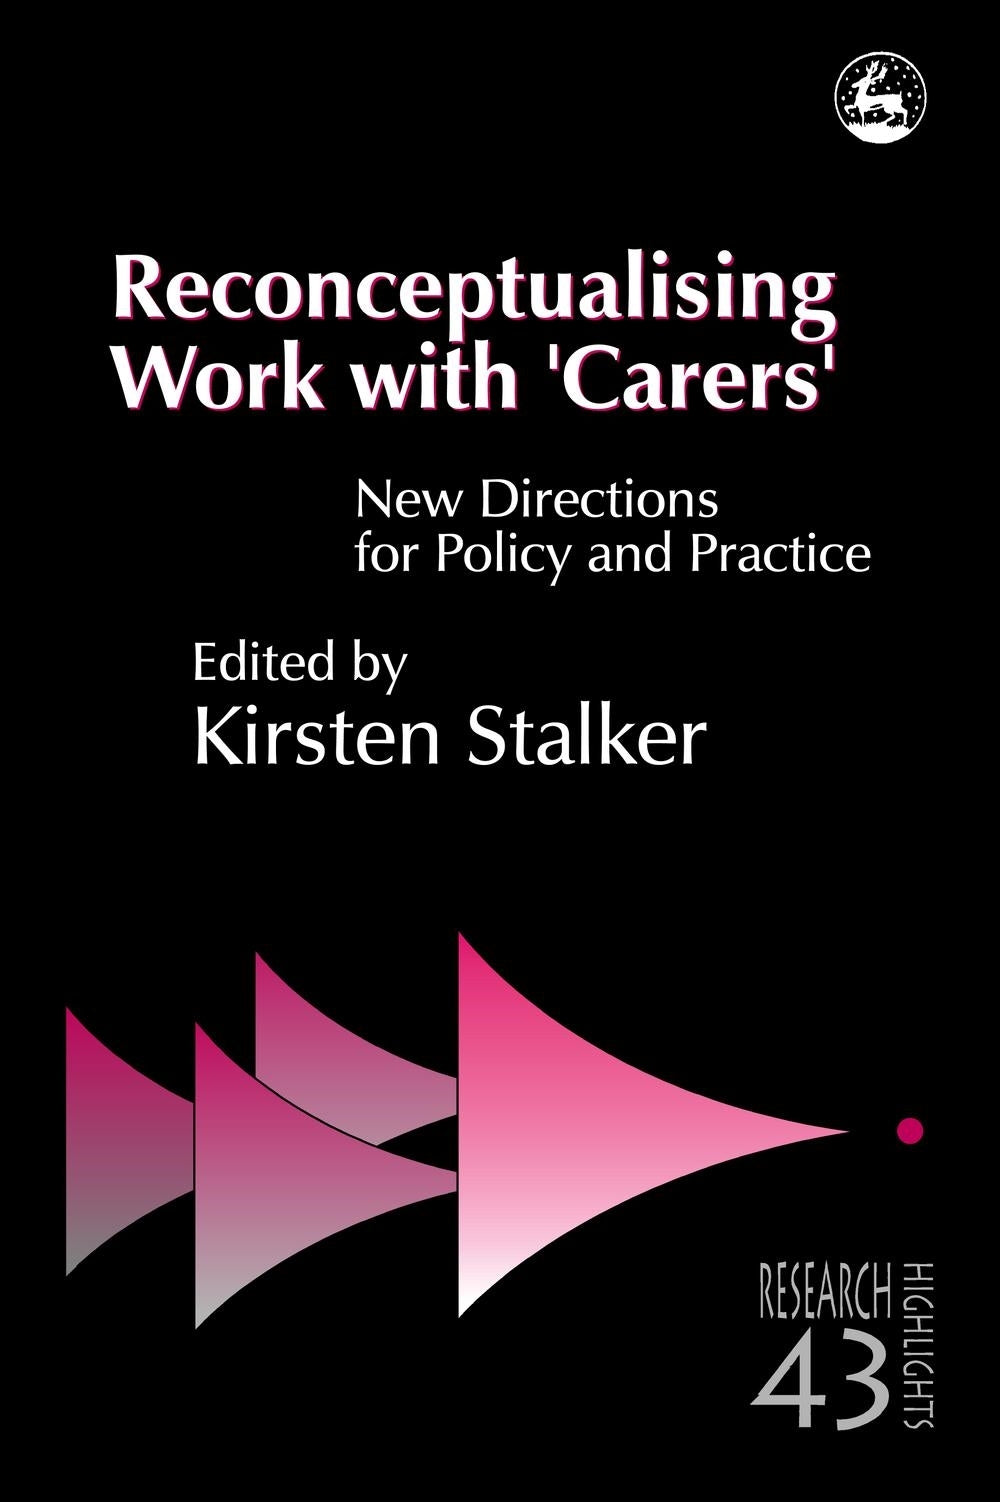 Reconceptualising Work with 'Carers' by Kirsten Stalker